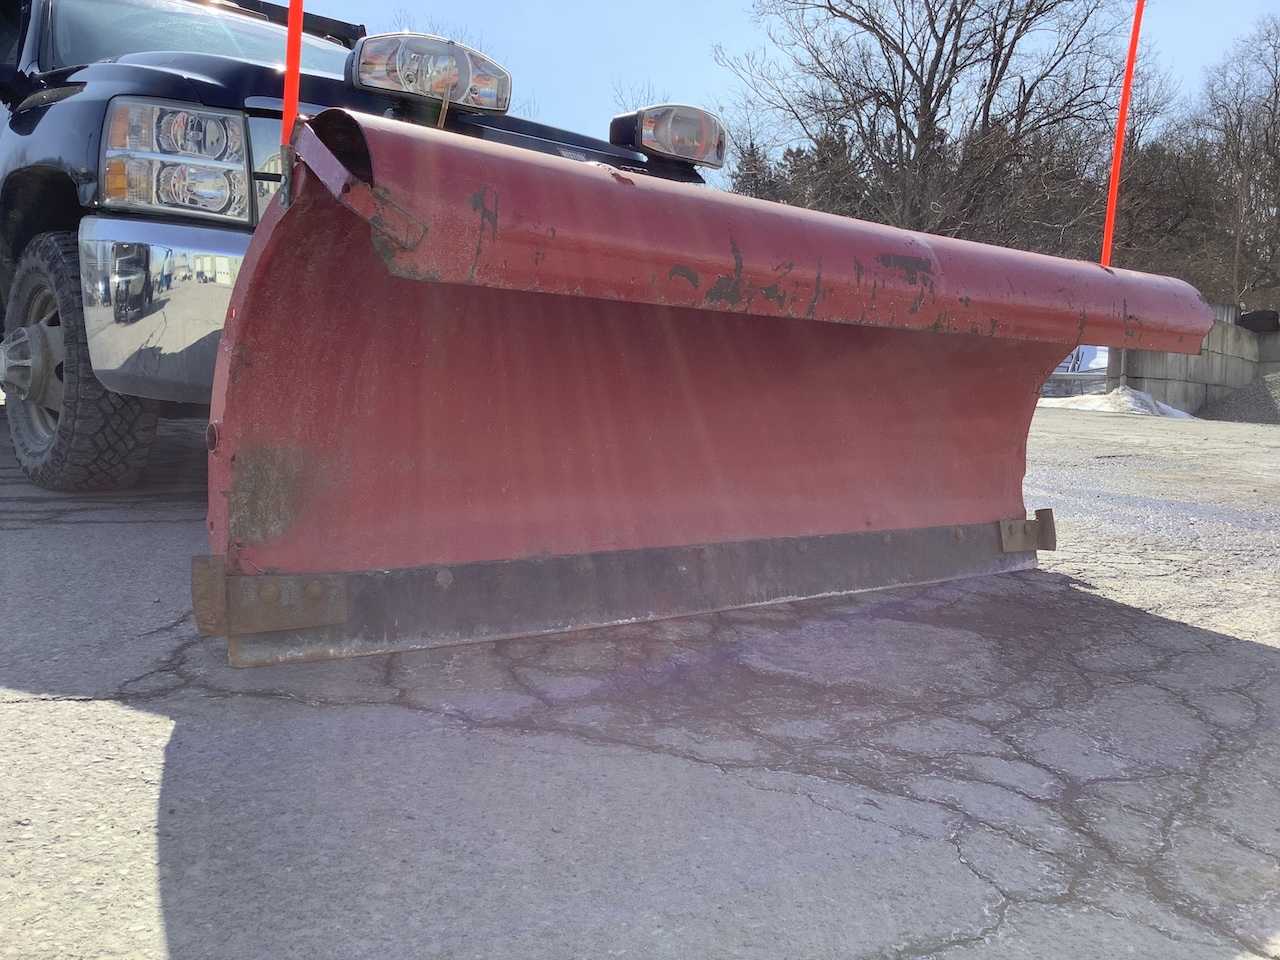 A red plow attached to a blue truck